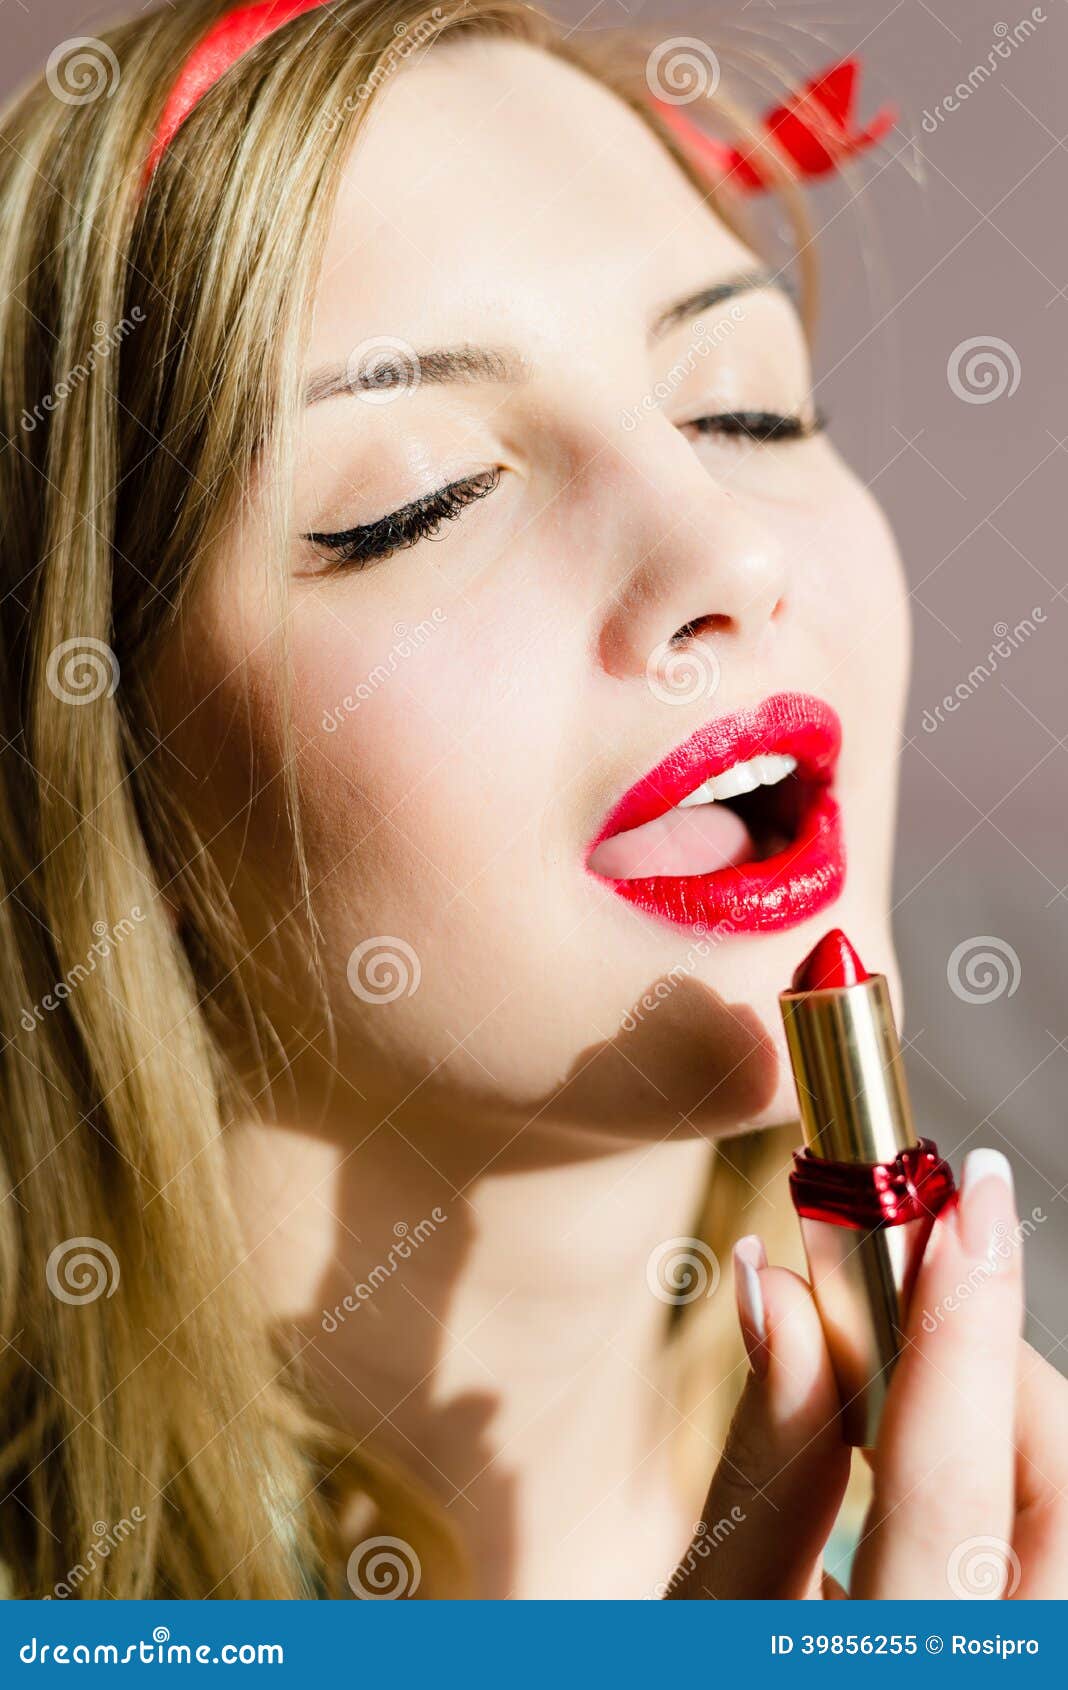 Closeup on Seductive Attractive Sexual Young Blonde Pinup Woman Draws Red Lipstick Open Lips Sensually Eyes Closed Stock Image